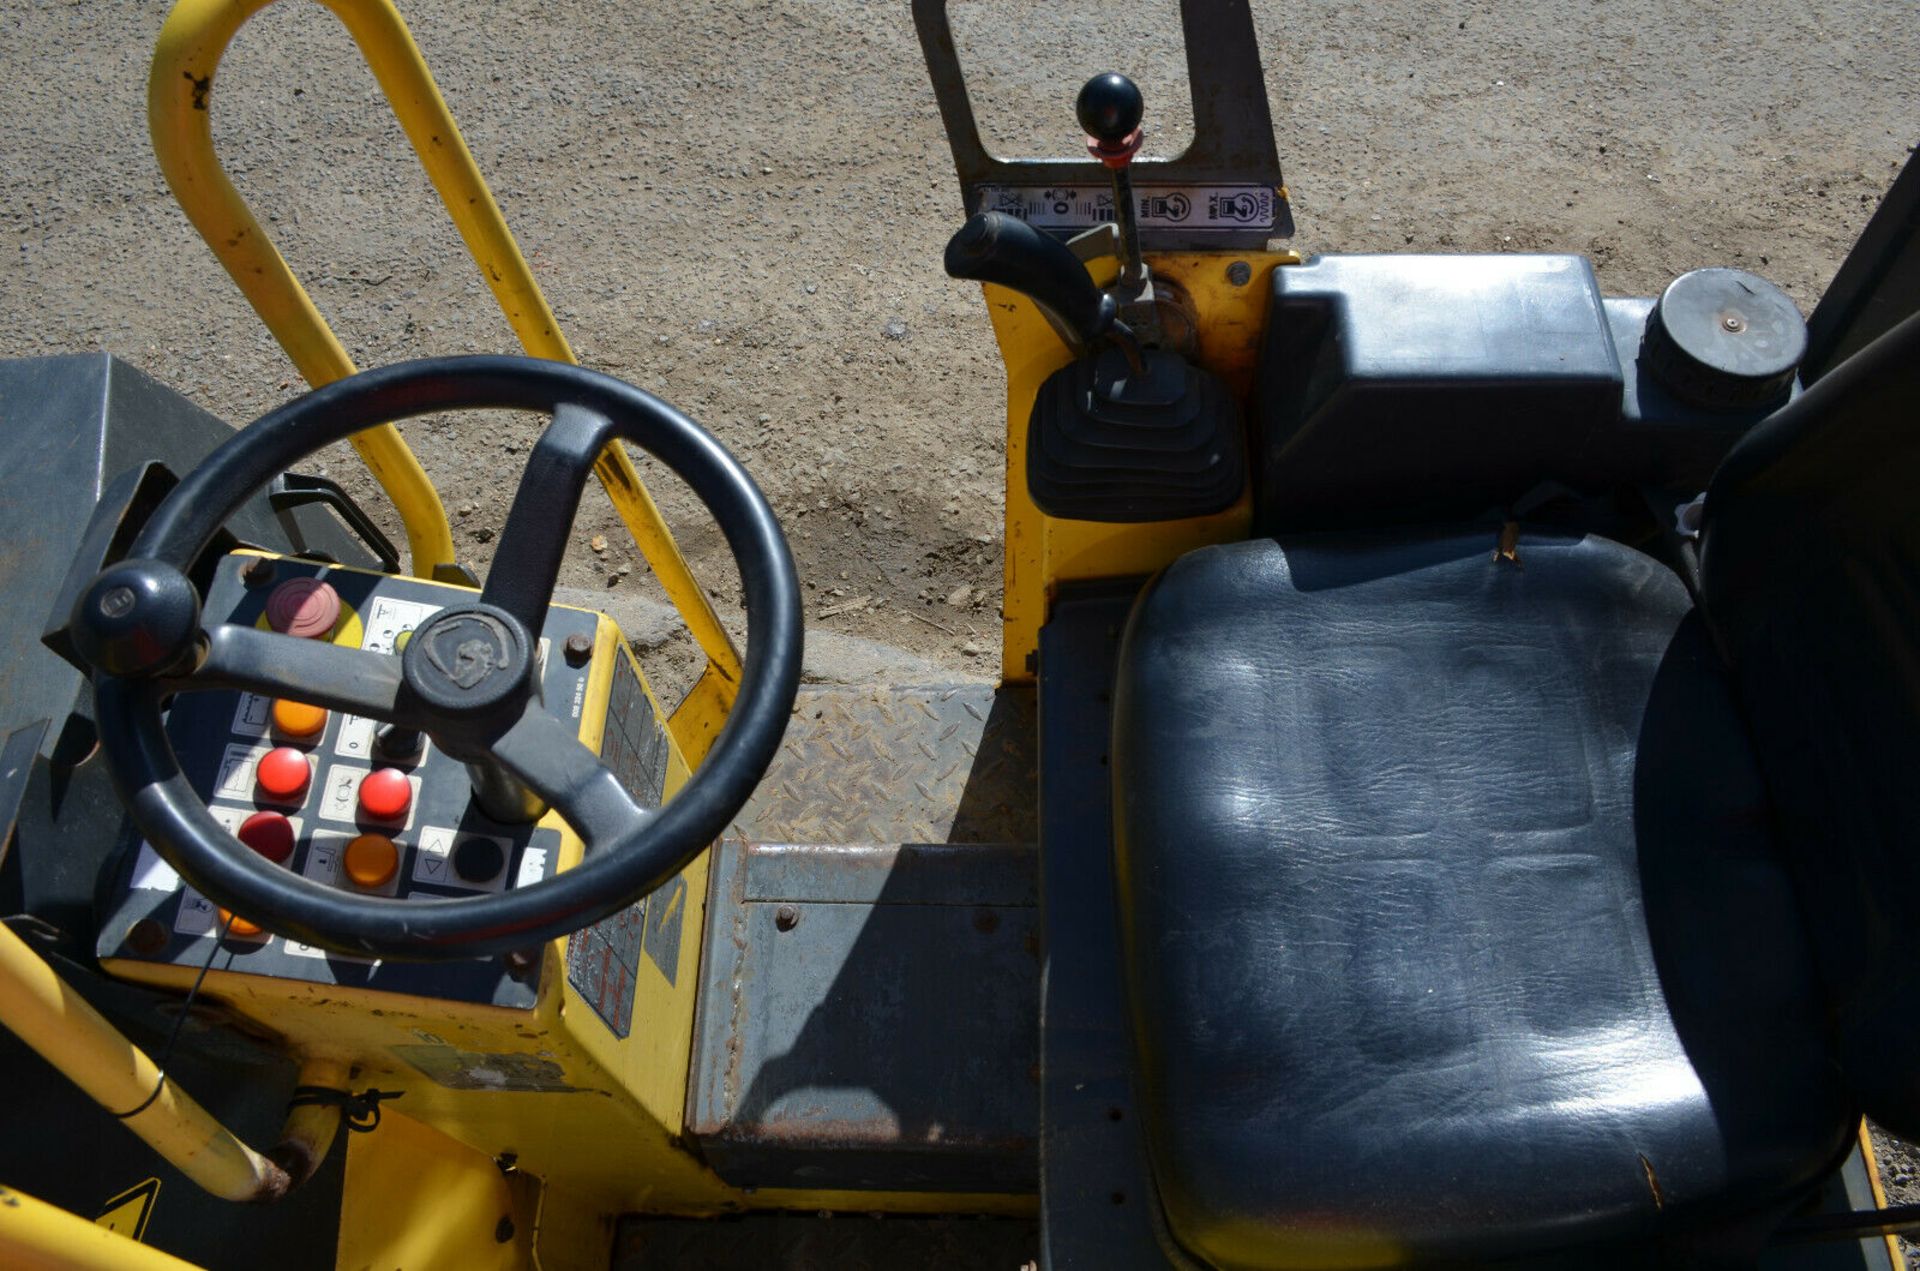 Bomag Bw 80 Ad-2 Roller 2006 - Image 6 of 11